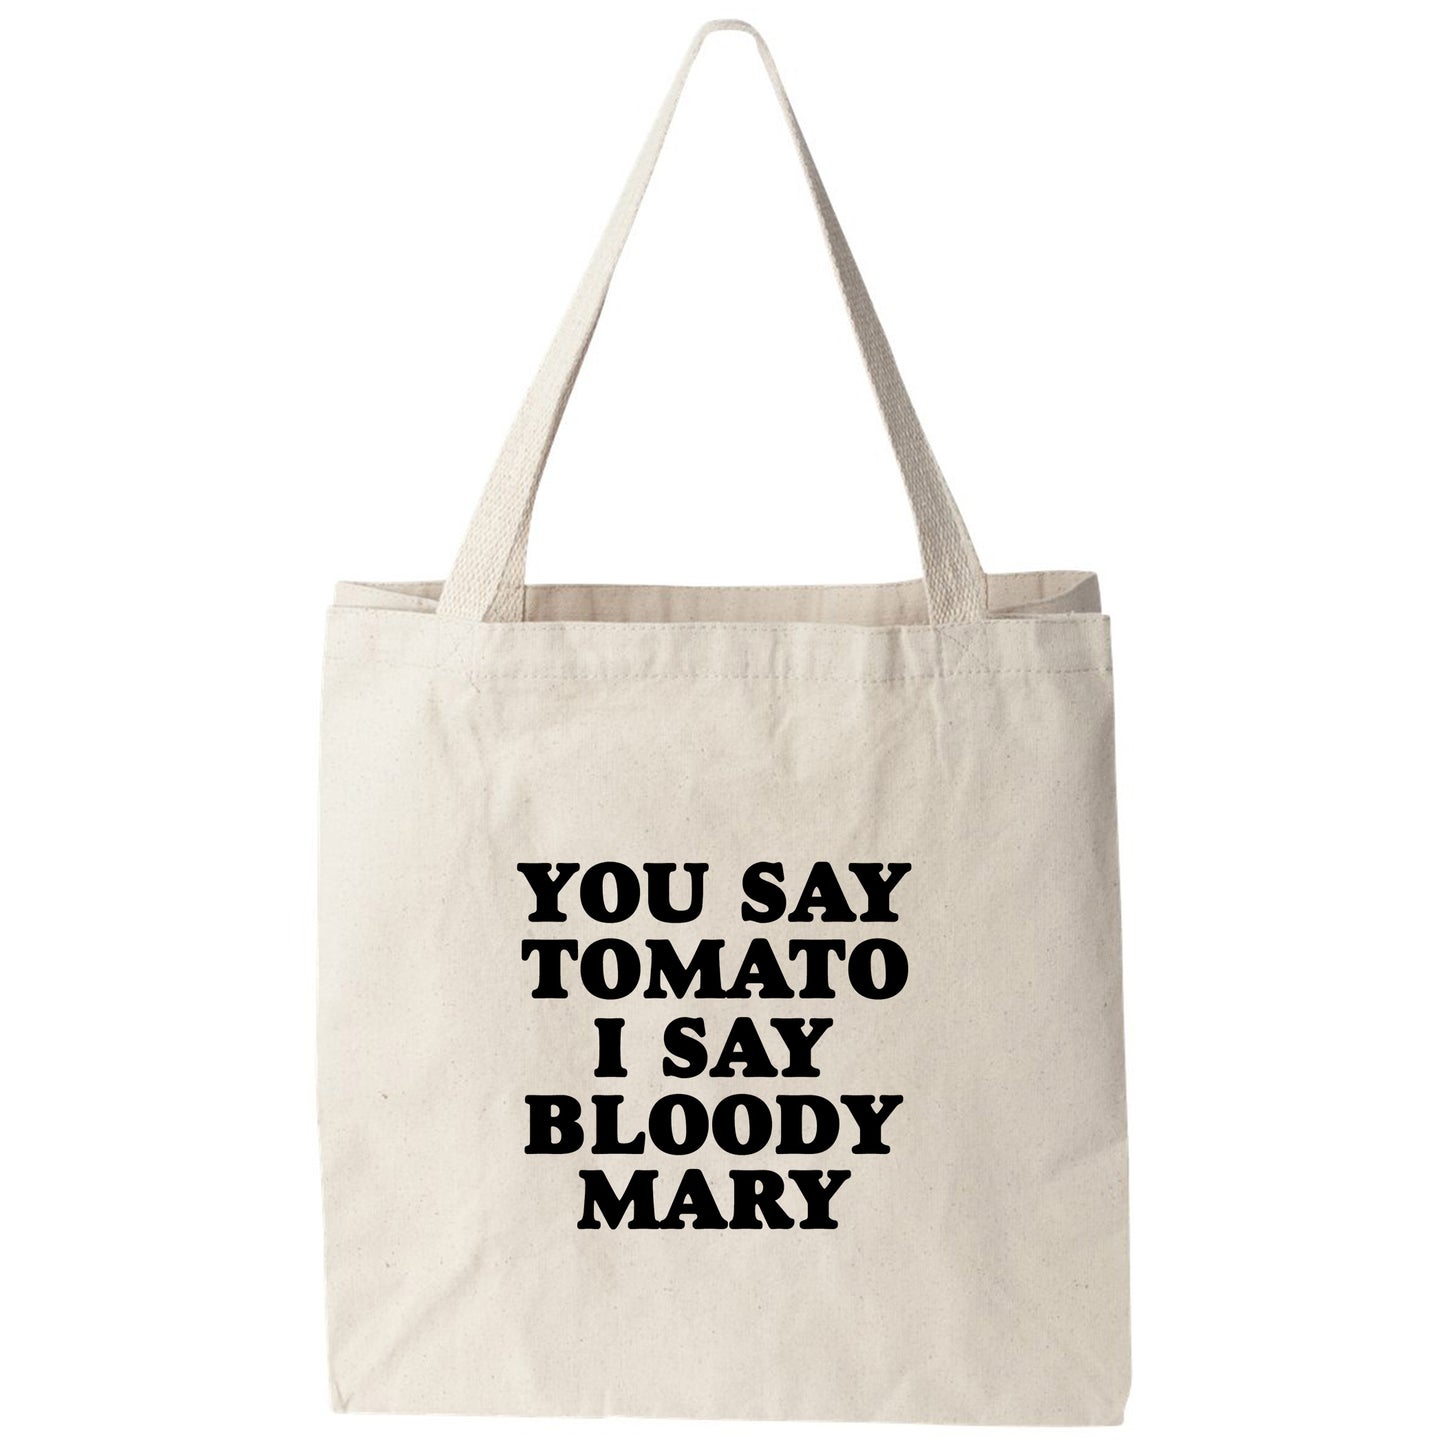 a tote bag that says you say tomato i say bloody mary